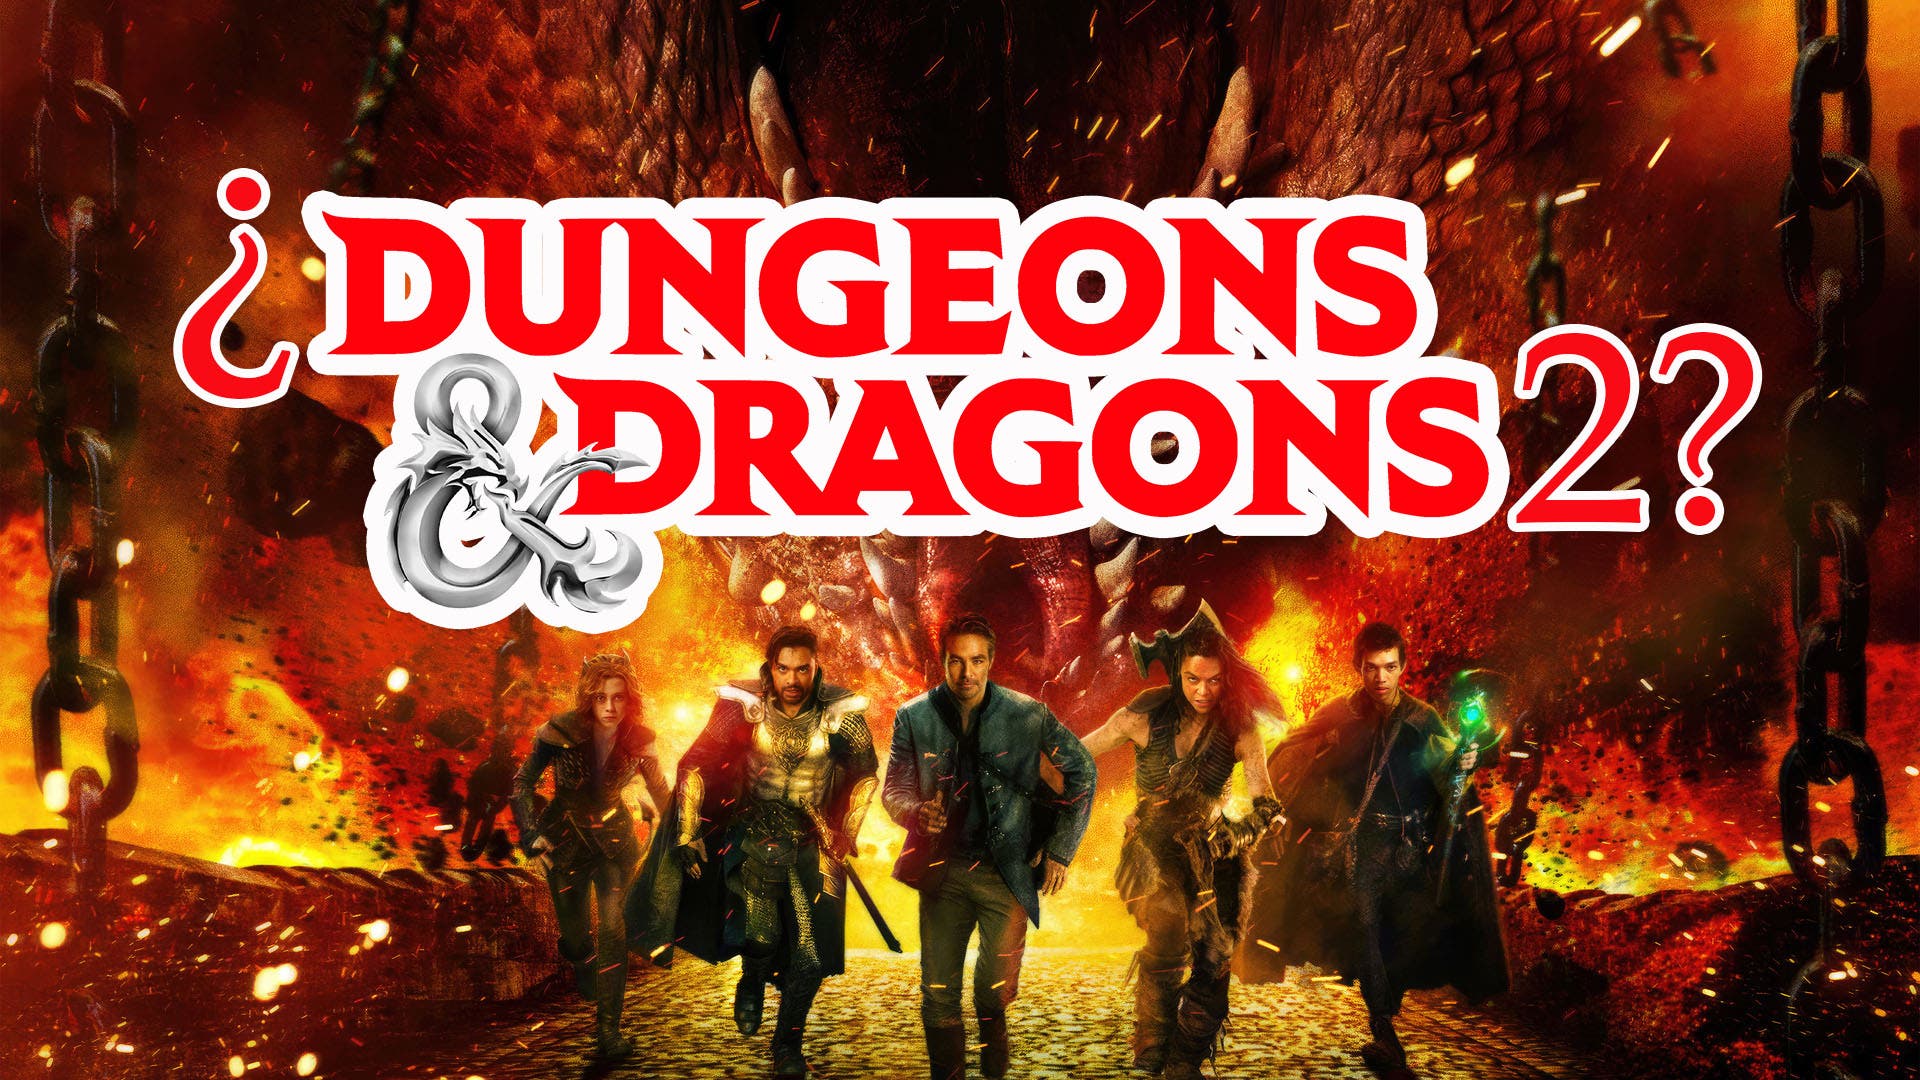 Dungeons & Dragons 2: Is another Dungeons & Dragons movie in the works after Honor Among Thieves?